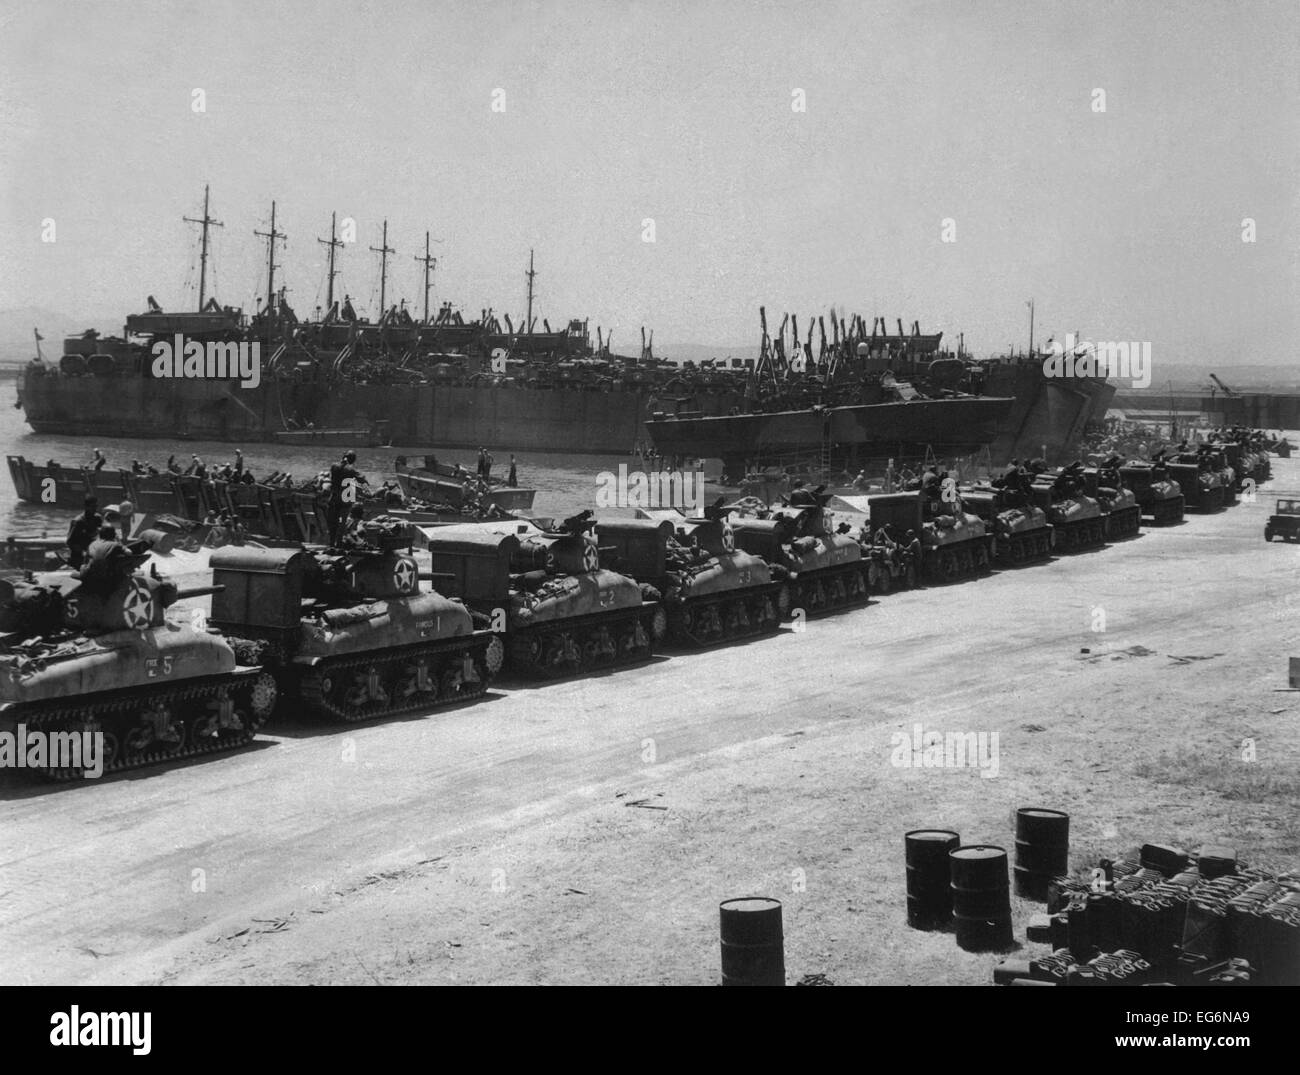 Two days before the Allied invasion of Sicily, tanks board landing craft. Ships are at the French Naval Base, La Pecherie, Stock Photo